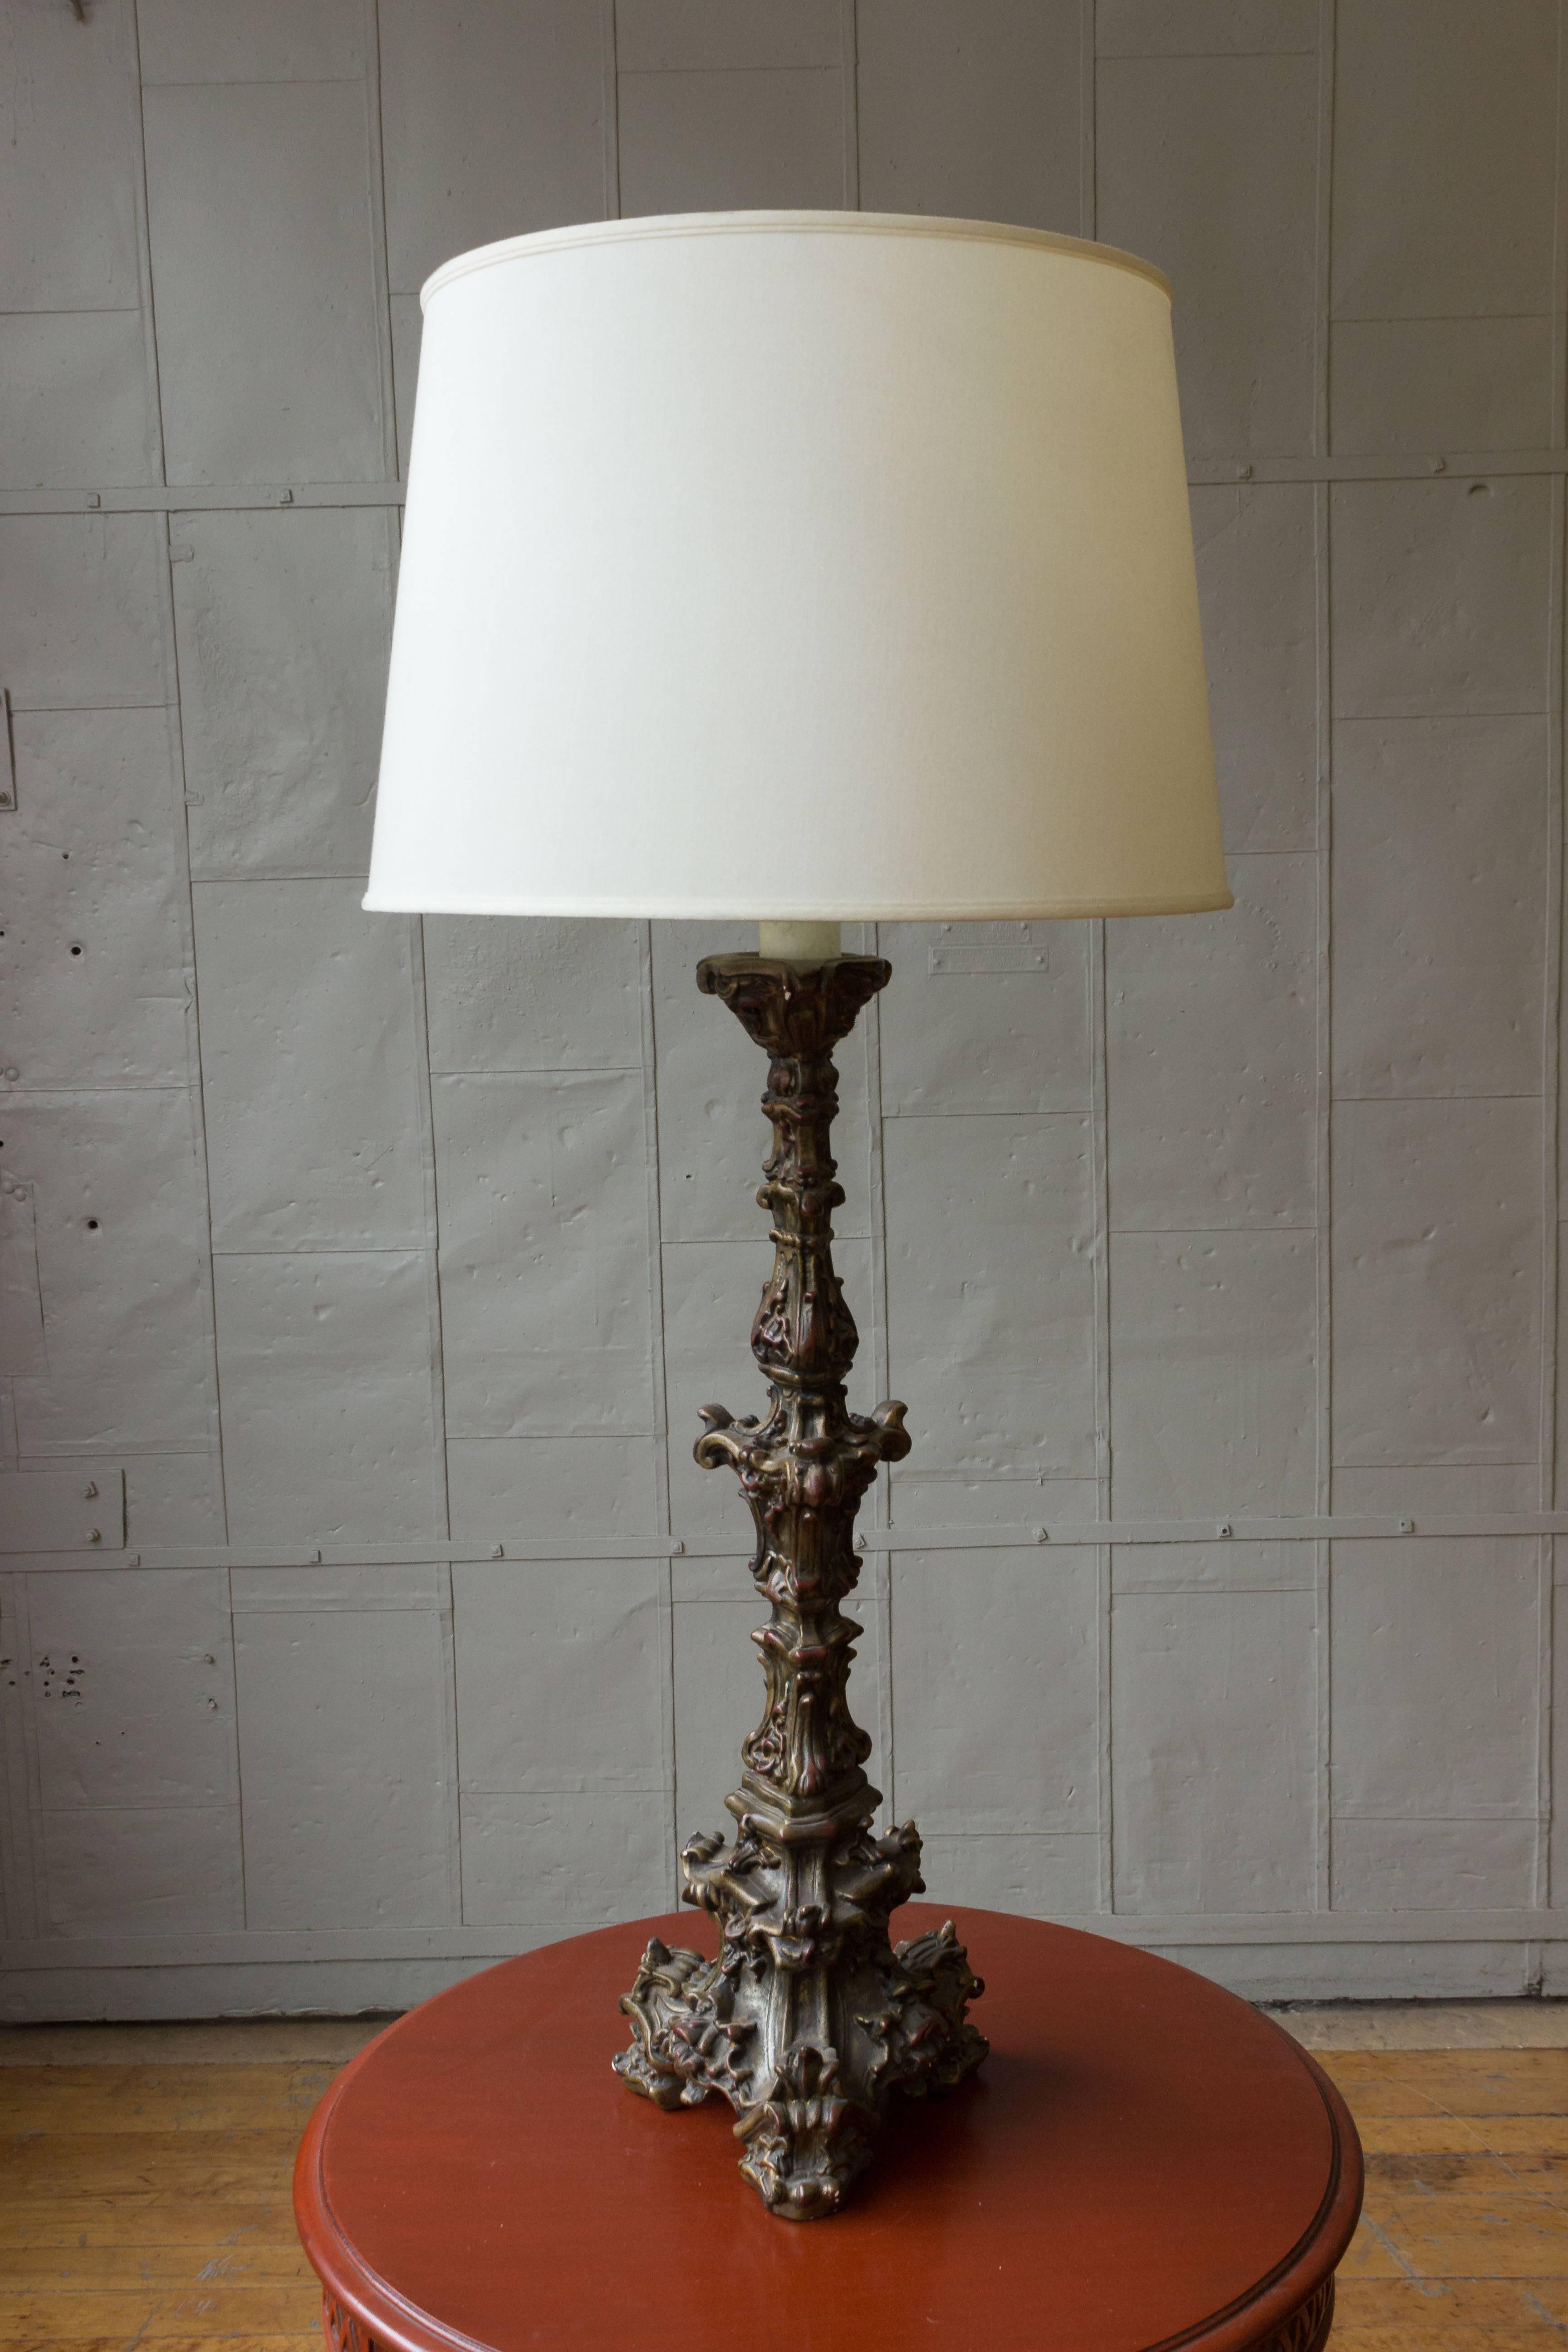 A unique pair of Italian mid century Neo-Baroque polyplaster table lamps in a dark bronze patina. These Neo-Baroque table lamps are an exquisite blend of vintage beauty and modern functionality. Standing tall at 45.5 inches in height, these